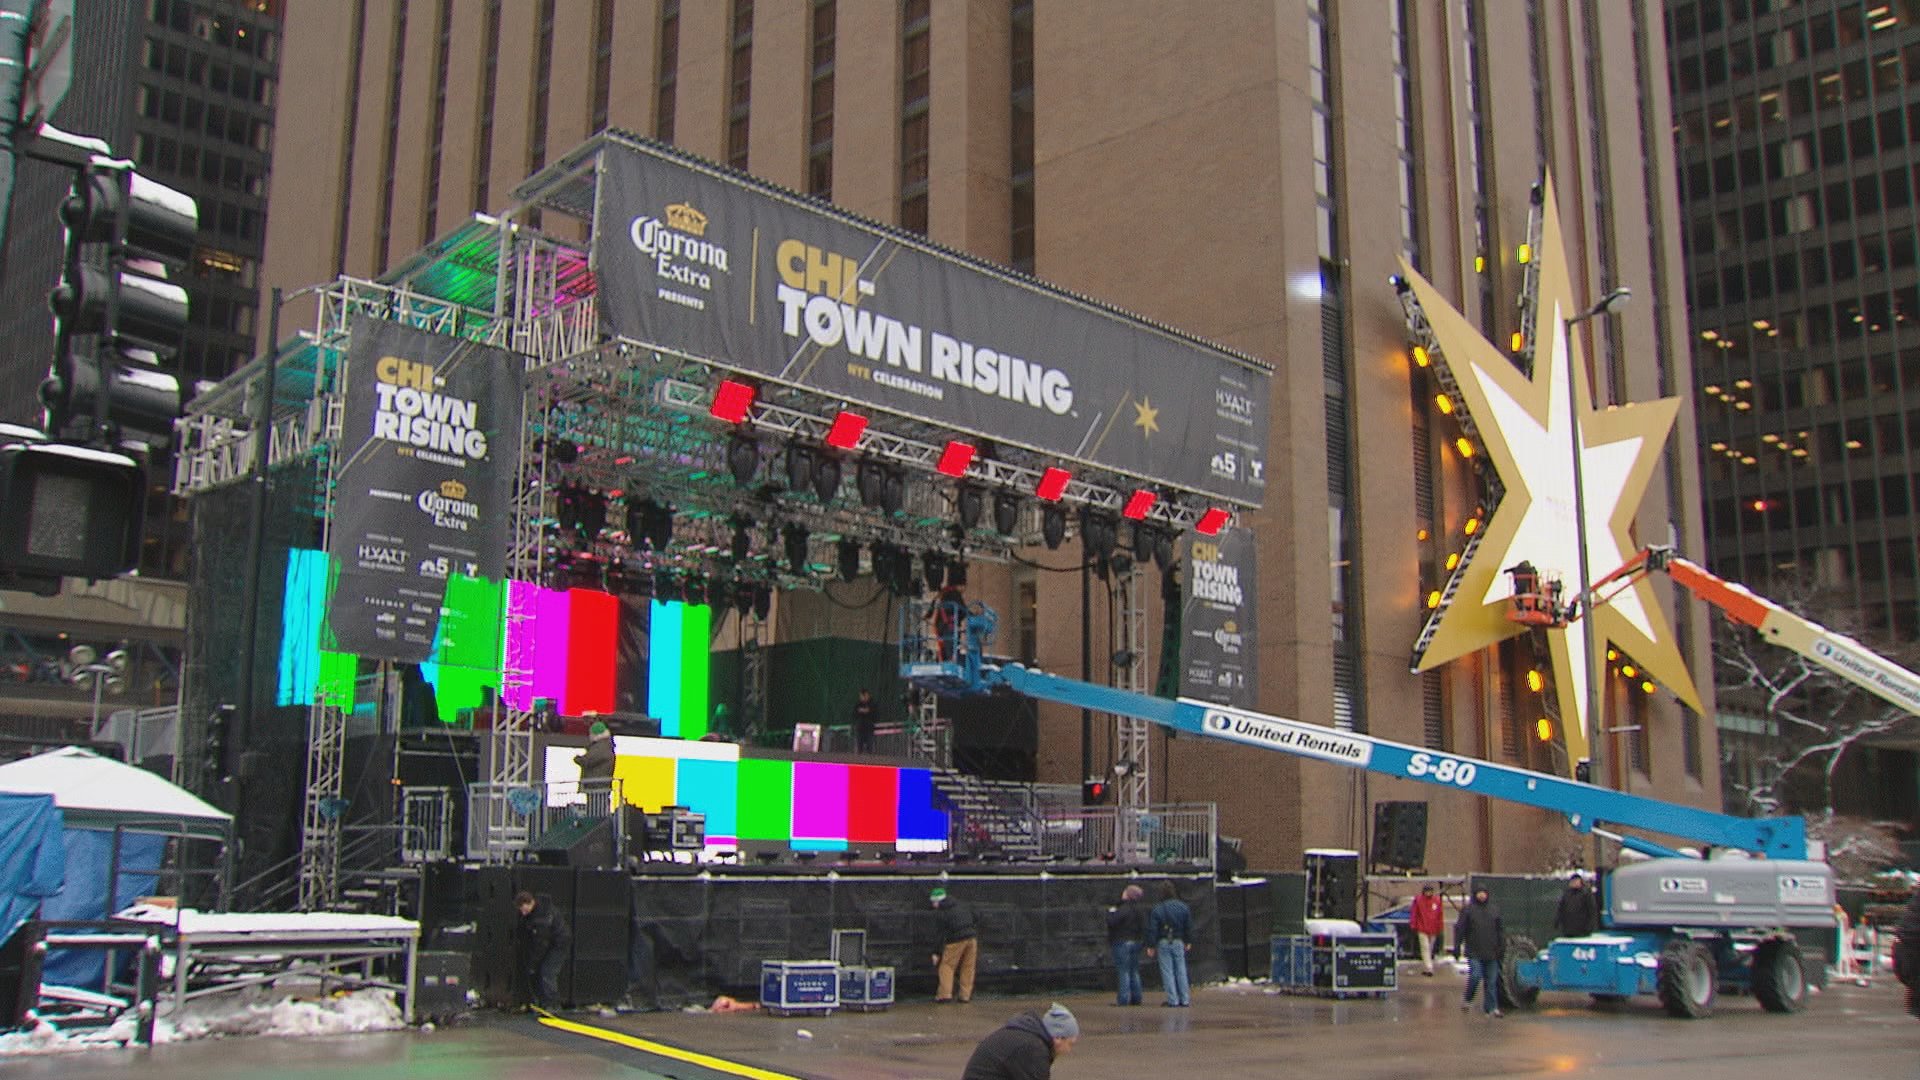 Crews set up the Chi-Town Rising Countdown Stage and Chicago star on Wednesday afternoon.